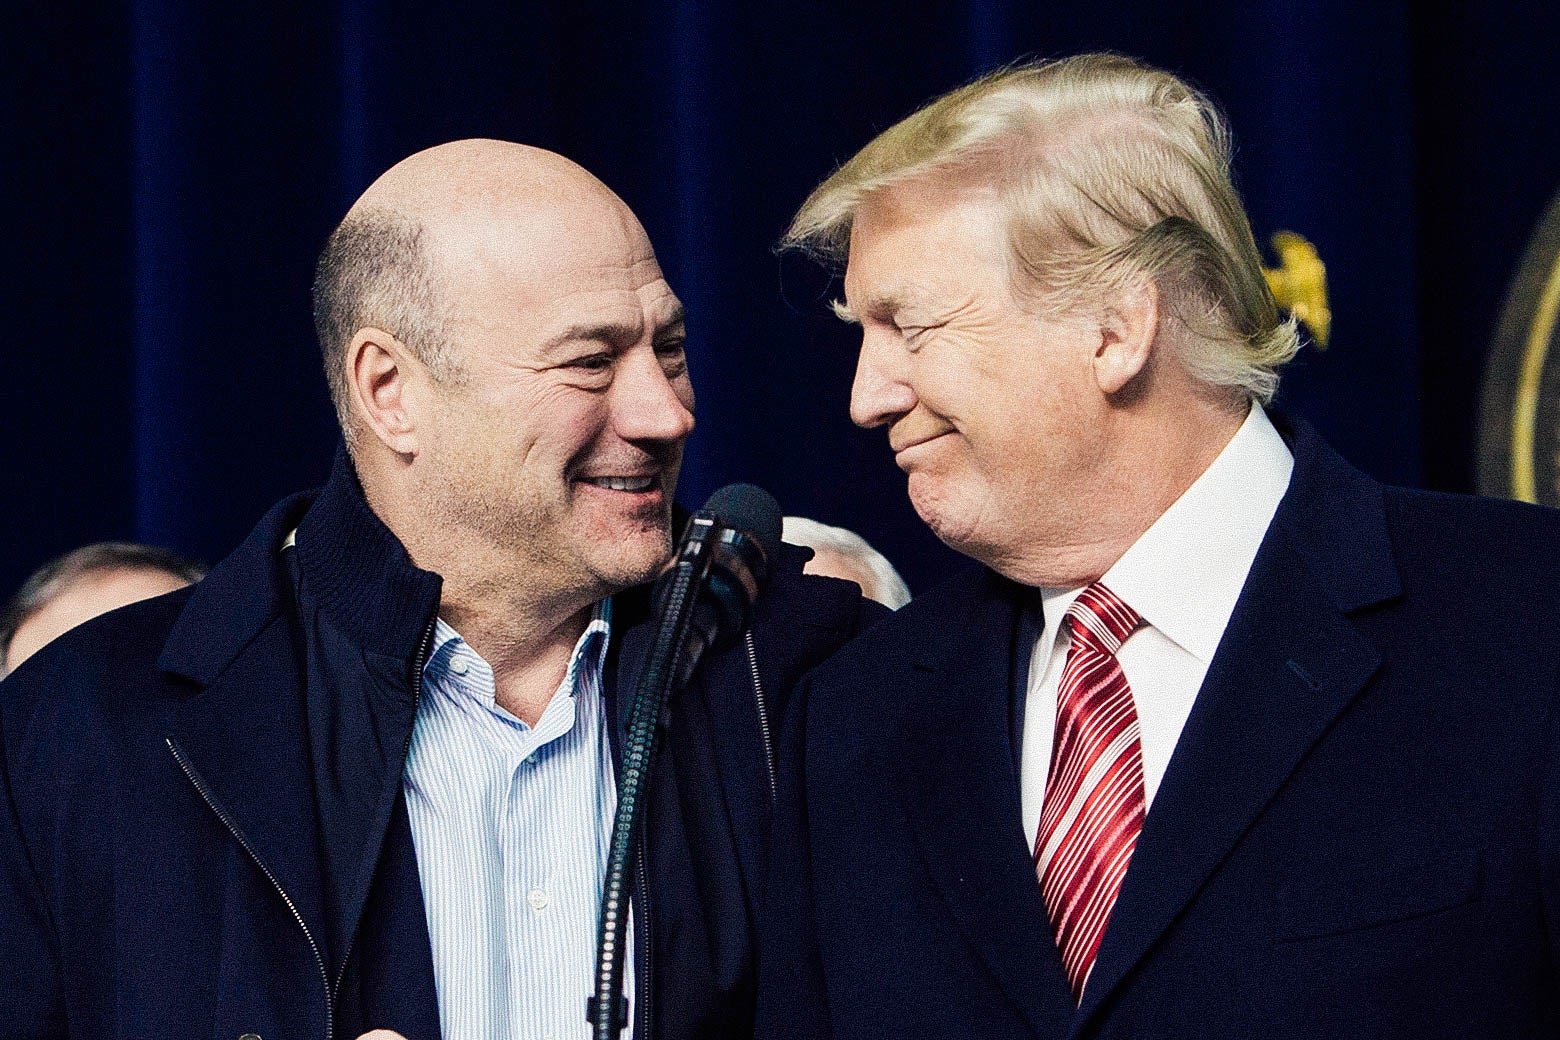 Gary Cohn and Donald Trump affirm their support for each other at Camp David on Jan. 6, 2018 in Thurmont, Maryland.